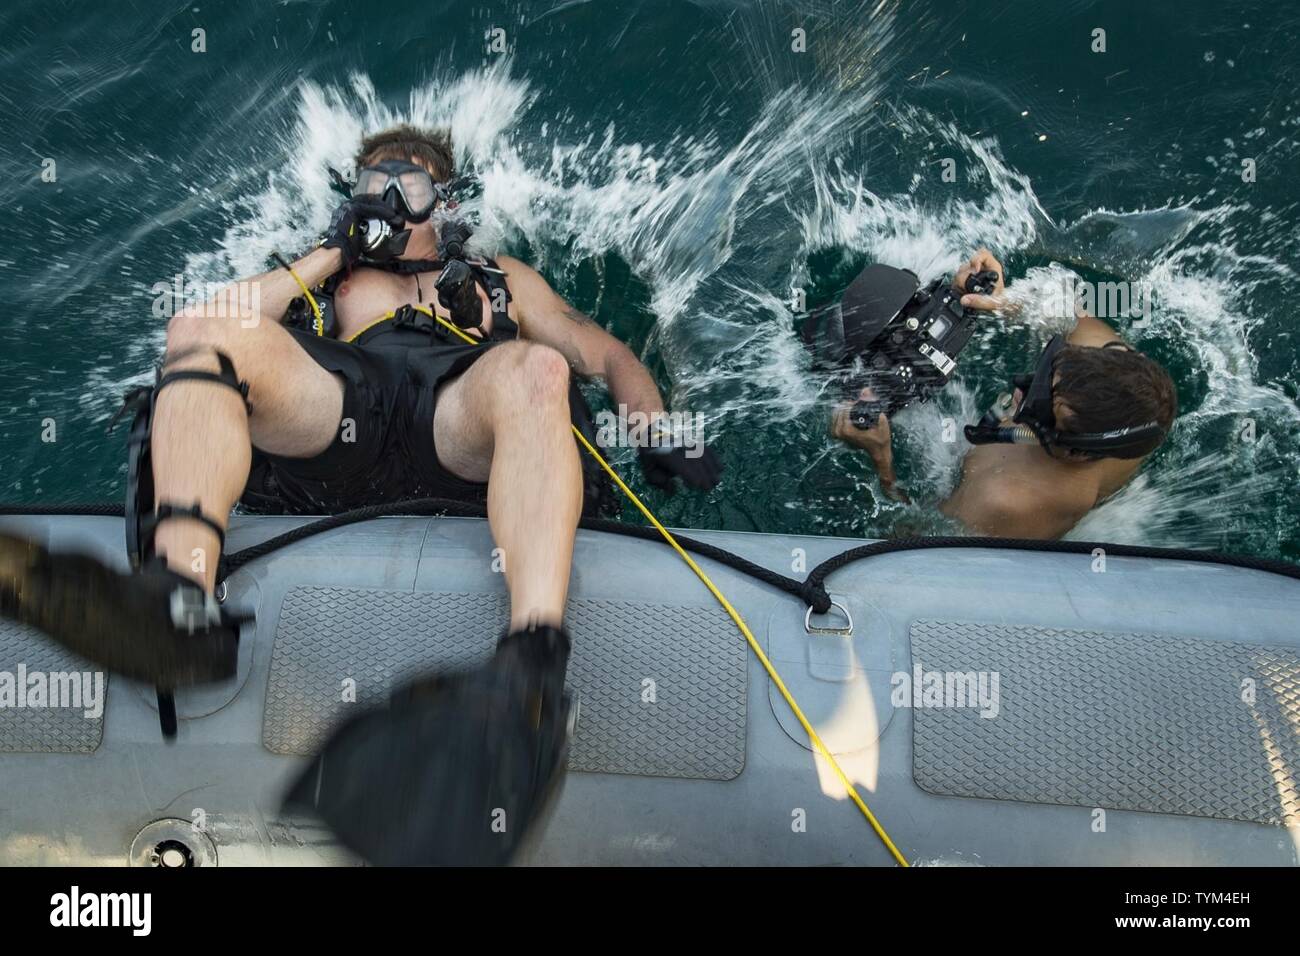 Petty Officer 1st Class Chris Liberto (left), assigned to Explosive Ordinance Disposal Mobile Unit (EODMU) 1 and Petty Officer 2nd Class Tyler Thompson from Expeditionary Combat Camera enter the water from an 11-meter ridged-hull inflatable boat during UK/US Mine Countermeasures Exercise 2017 (UK/US MCM-Ex 17) Nov. 15, 2016. The exercise is a bilateral mine countermeasures (MCM) exercise between the U.S. Navy and Royal Navy designed to provide an opportunity for both nations to share knowledge of MCM techniques to respond to mine threats. The combined MCM force will enhance MCM capabilities in Stock Photo